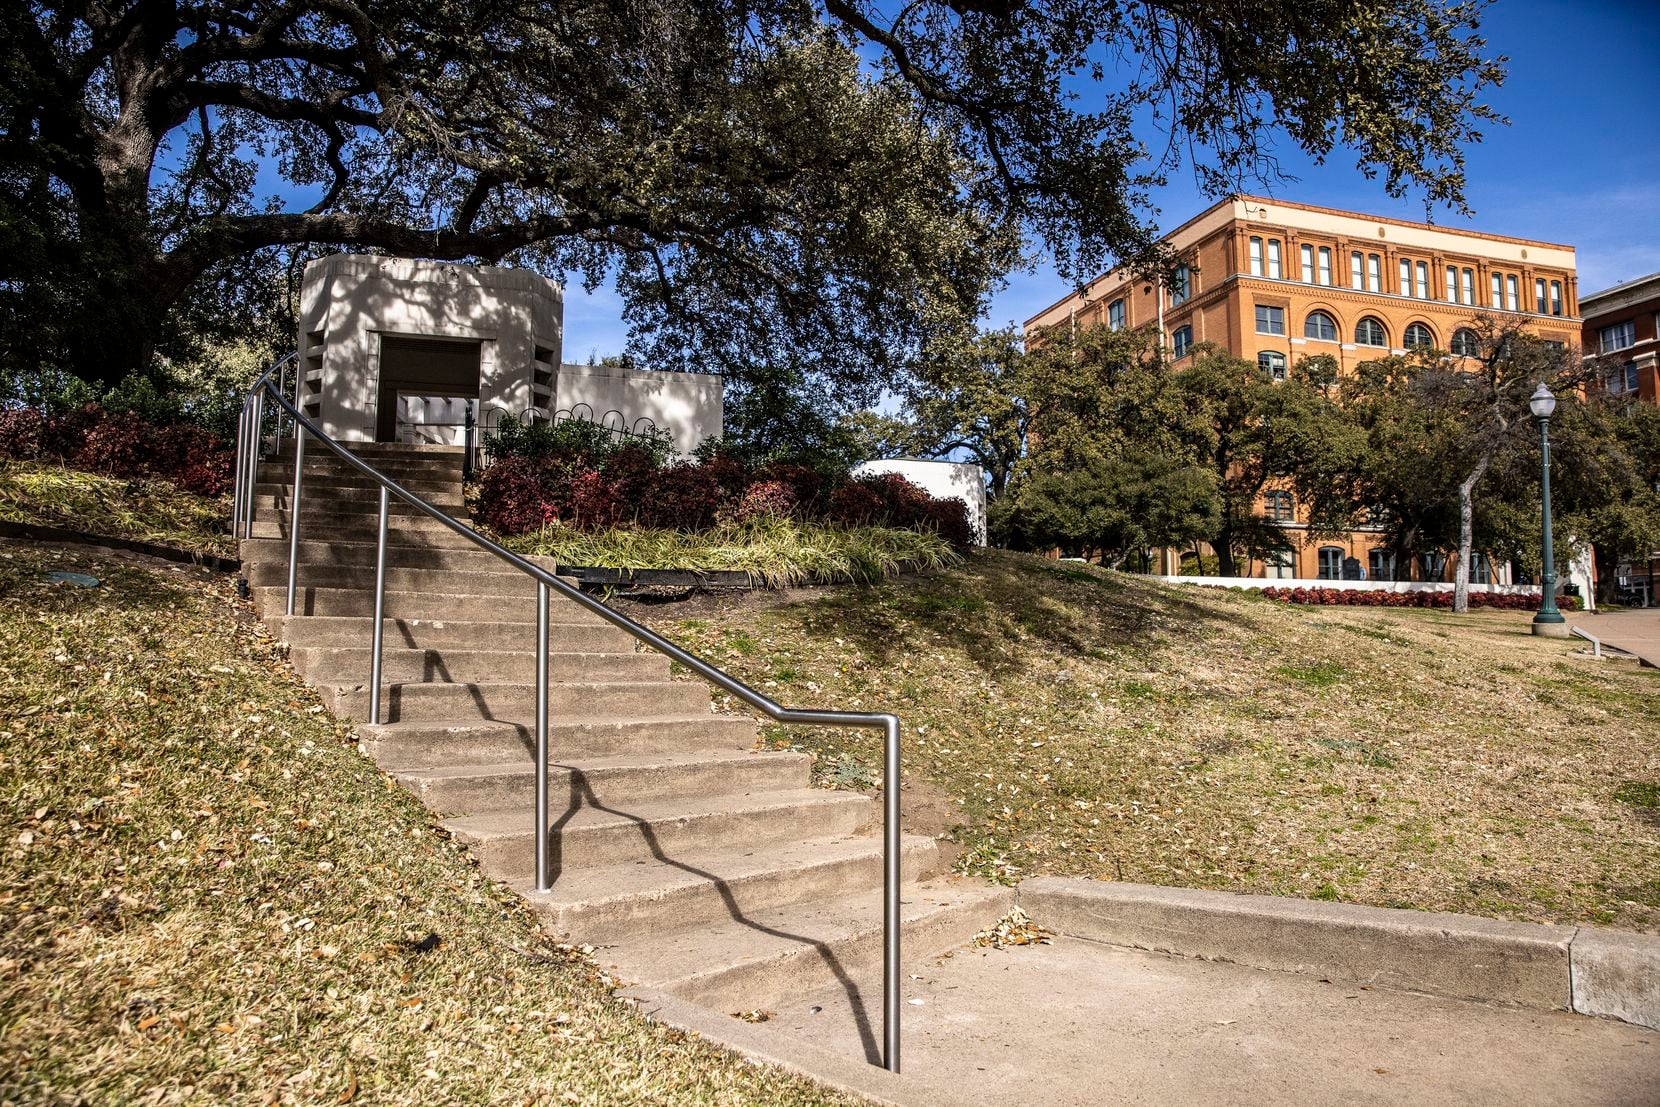 A staircase at Dealey Plaza allows visitors a way to walk from parking lots to the sidewalk...